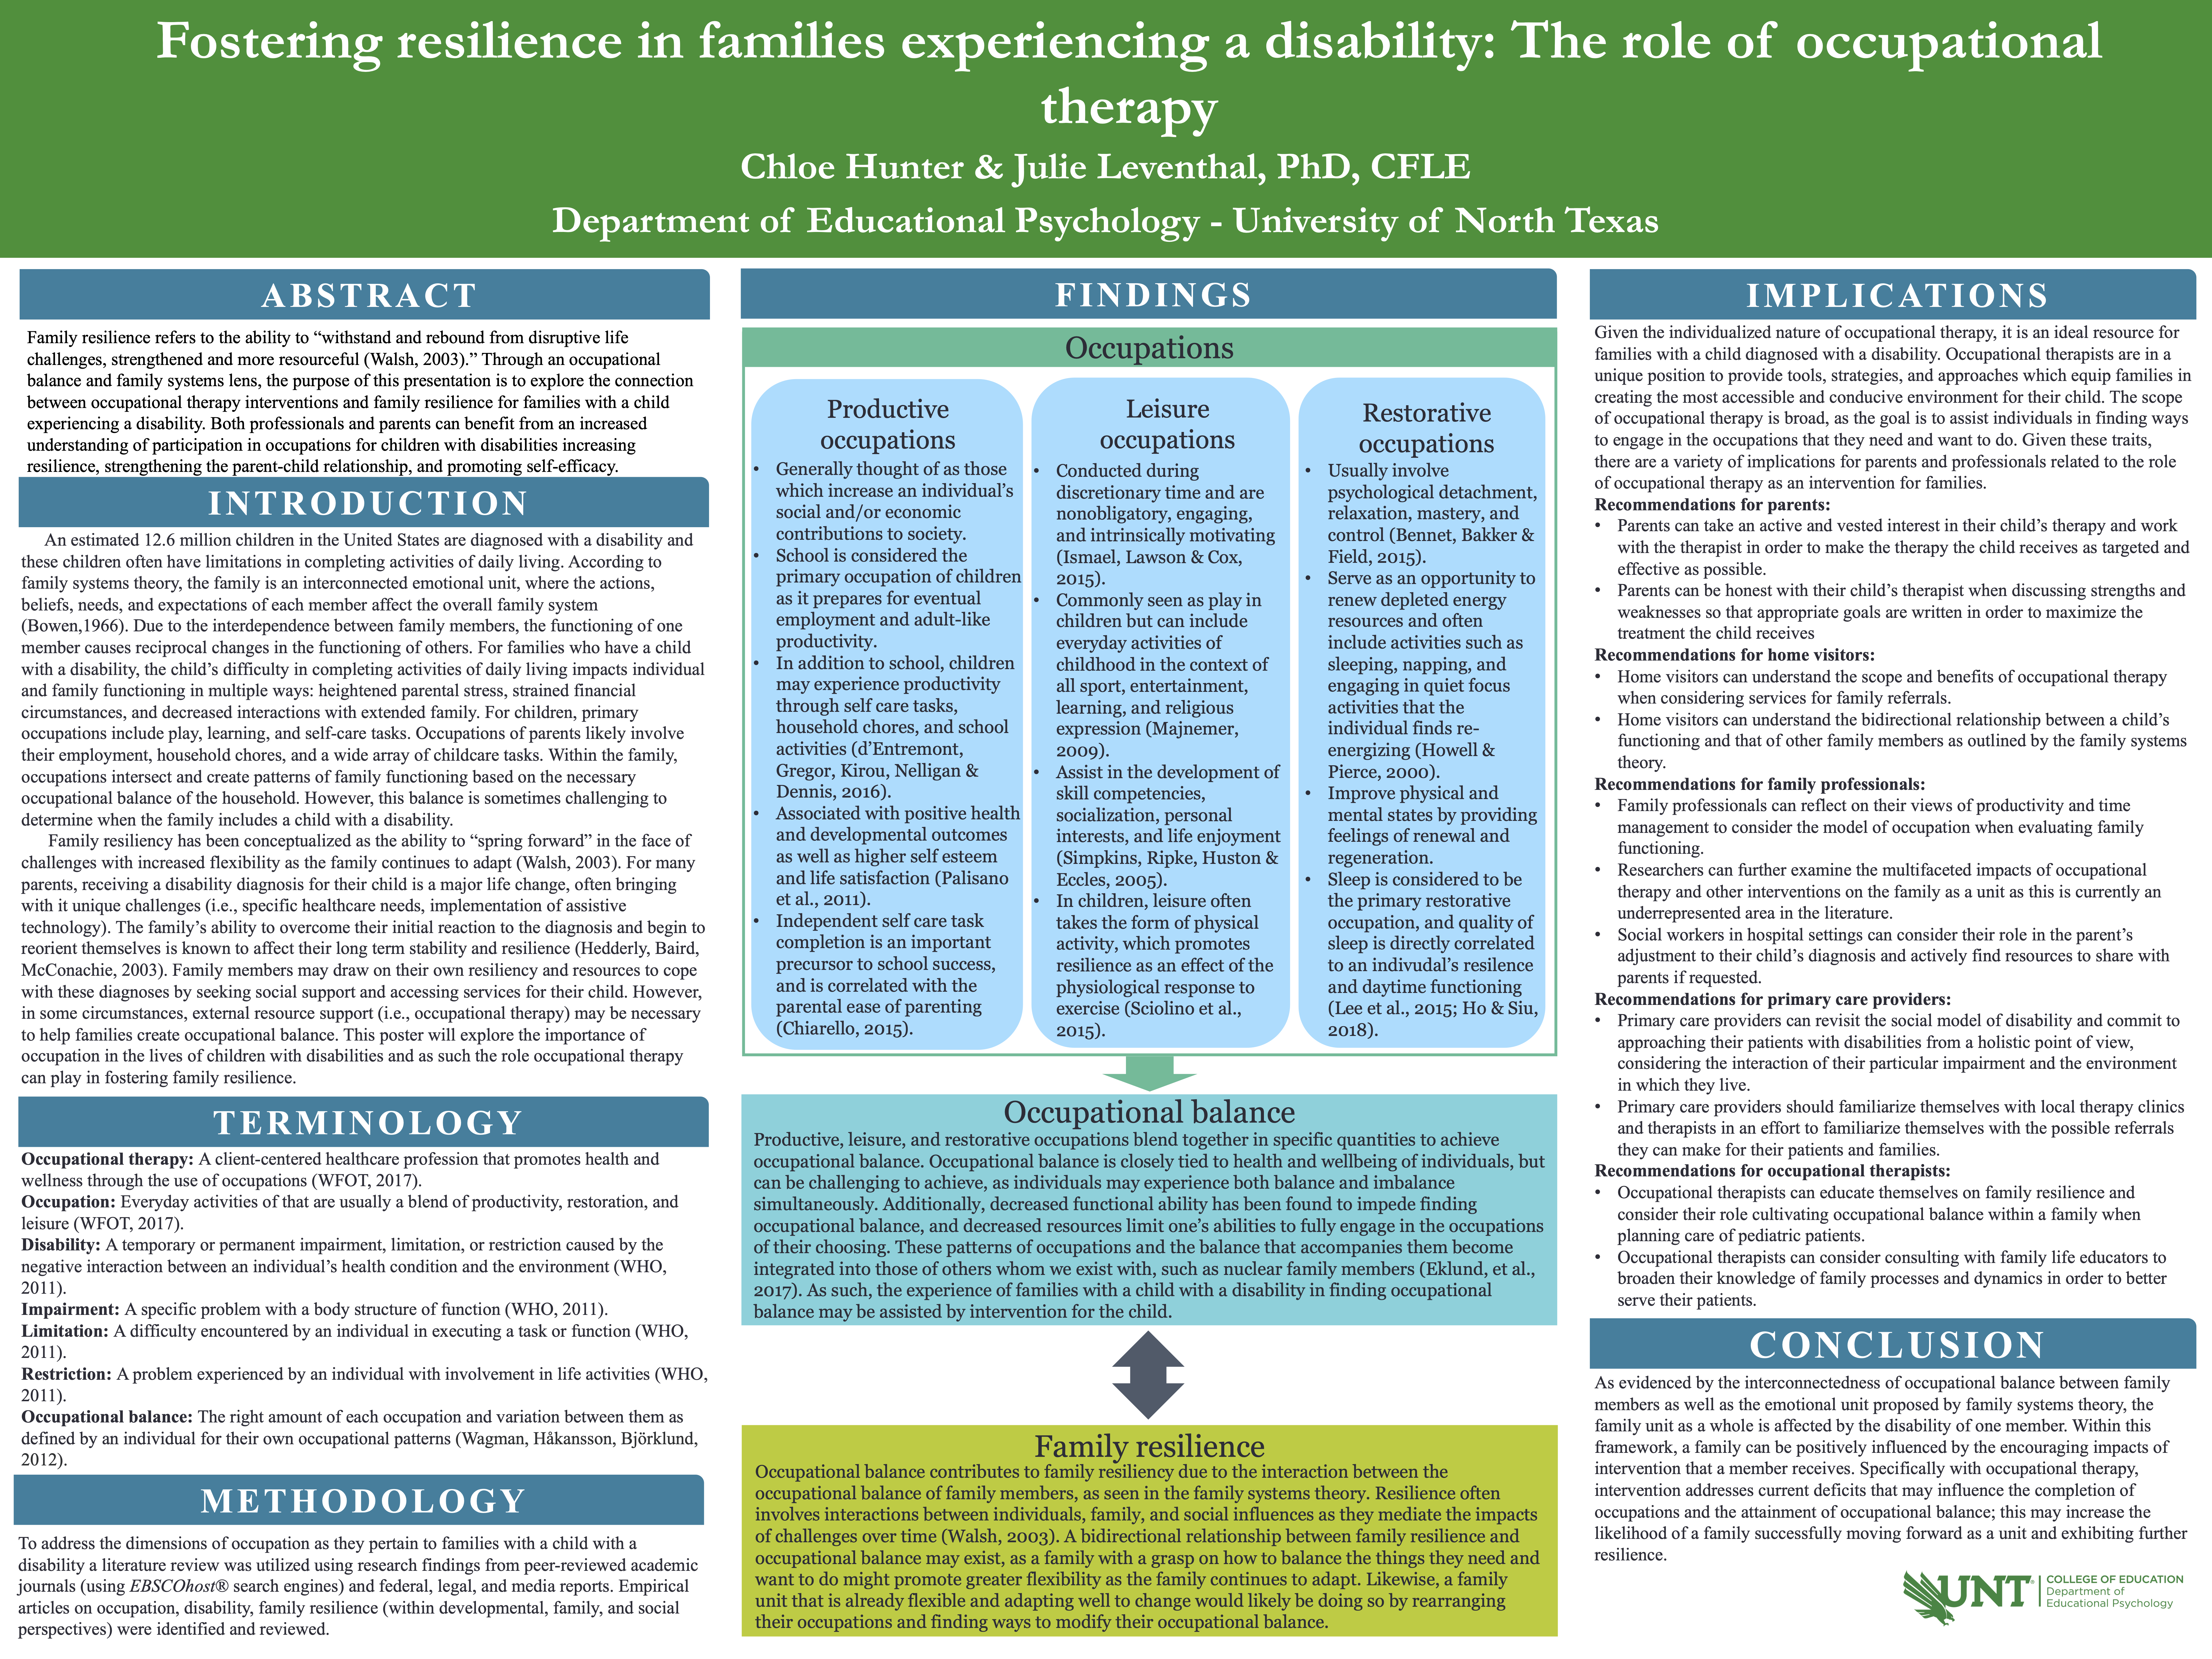 Fostering resilience in families experiencing a disability: The role of occupational therapy